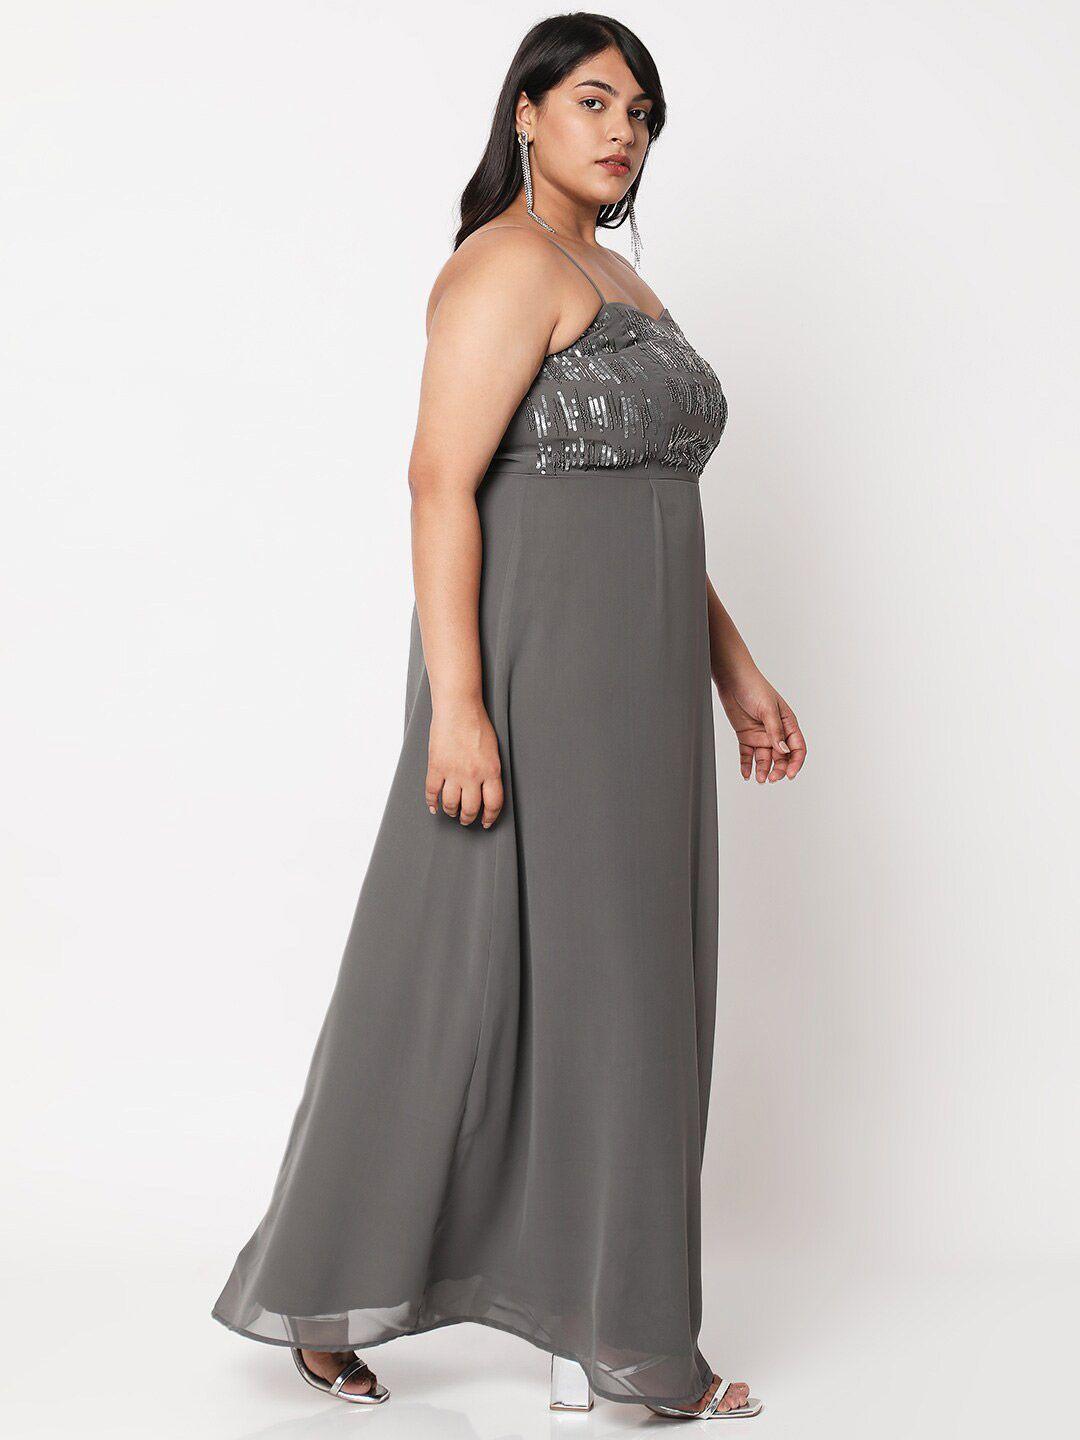 curves by mish plus size charcoal embellished maxi dress